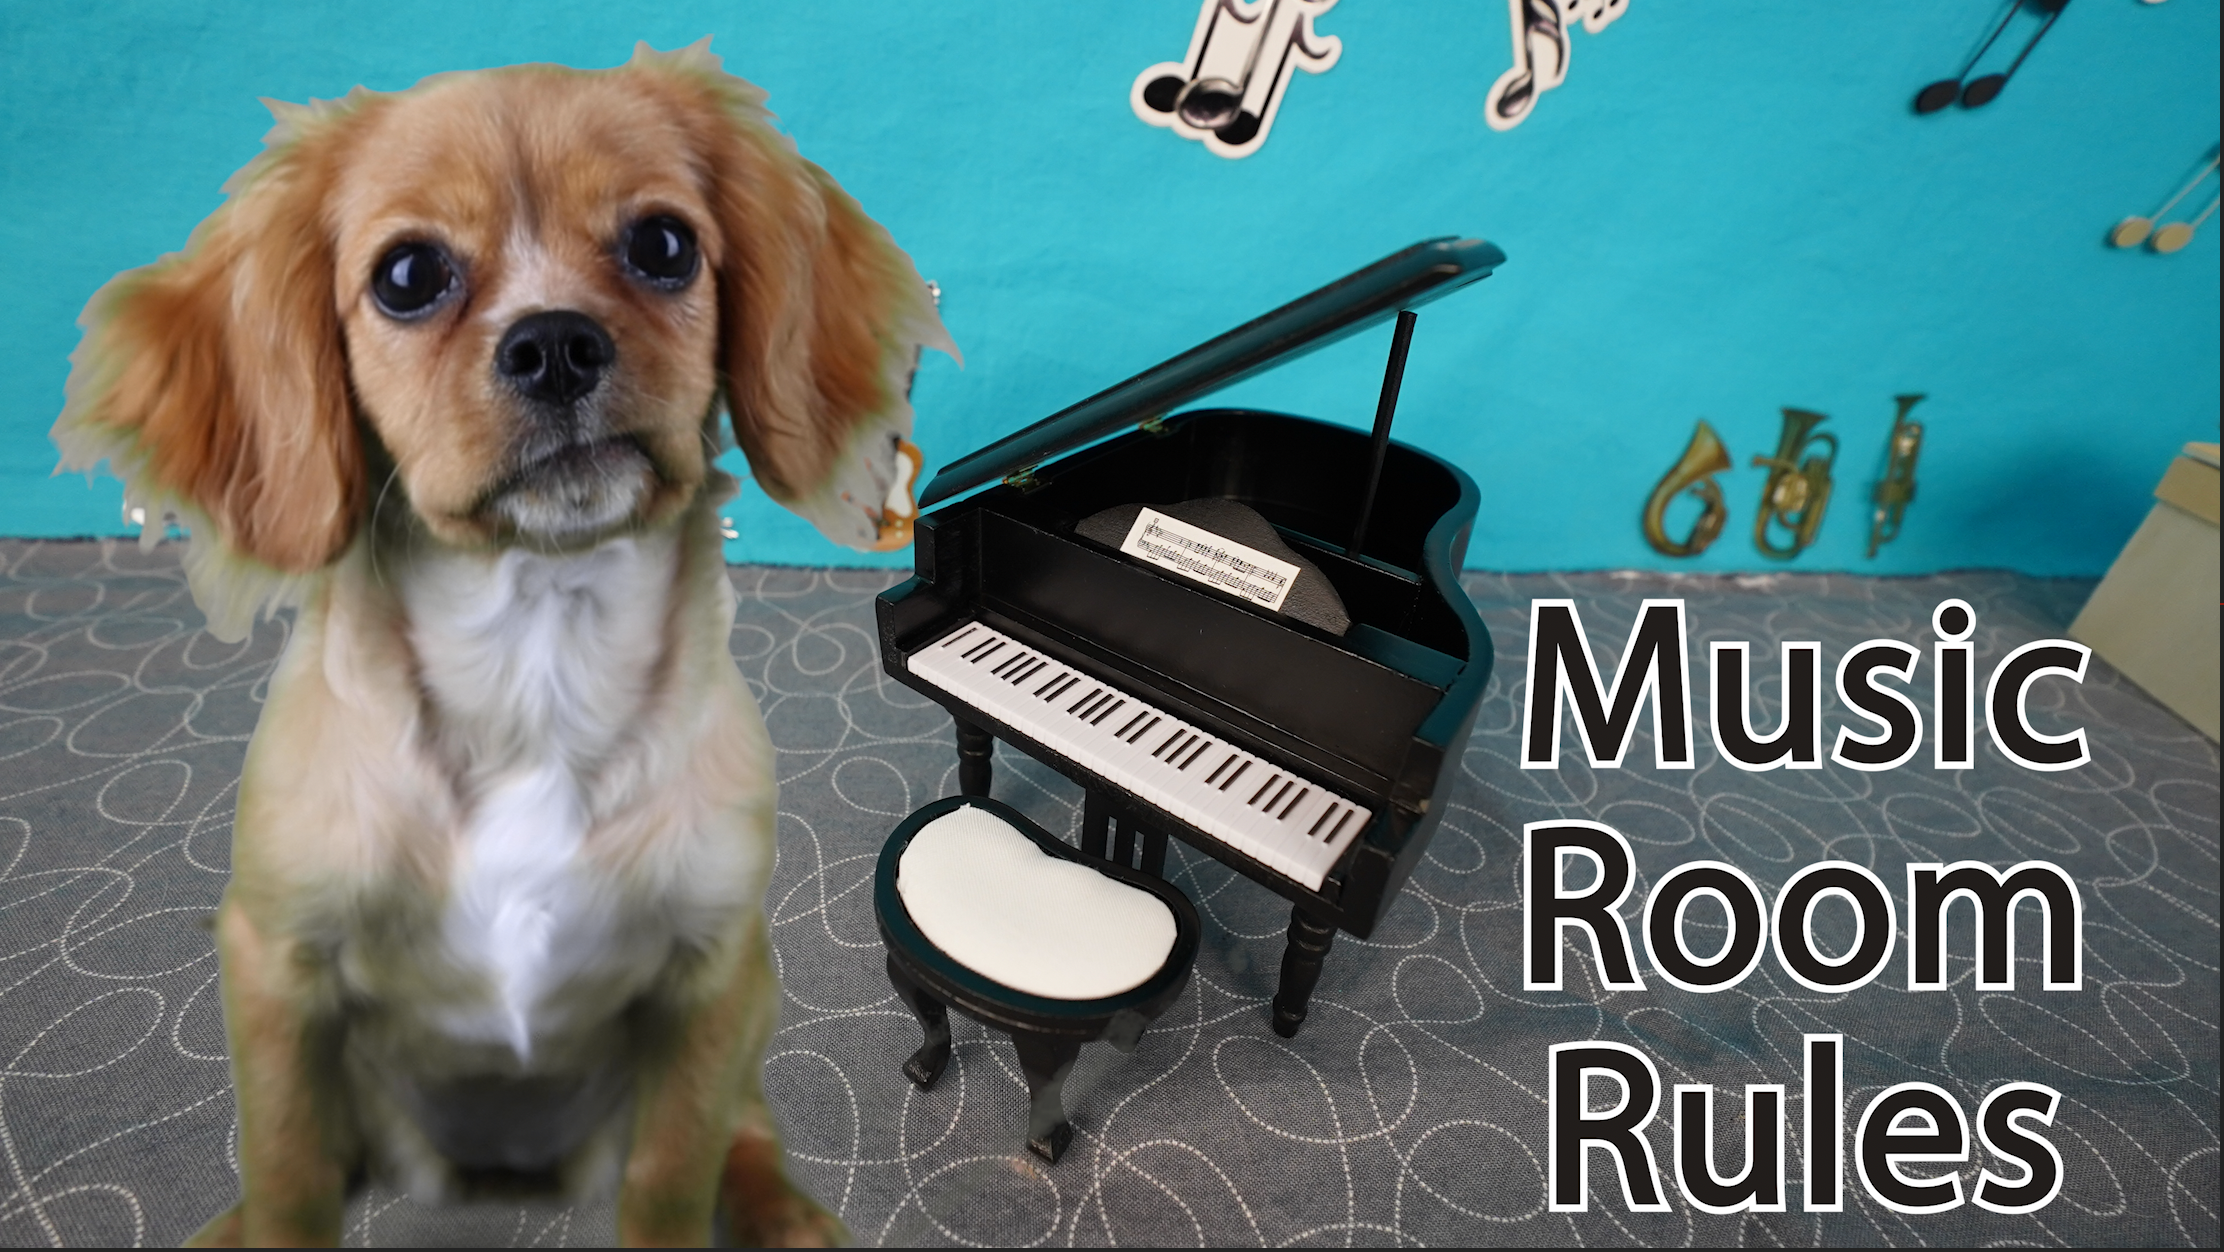 Music Room Rules: A Lesson For Kids